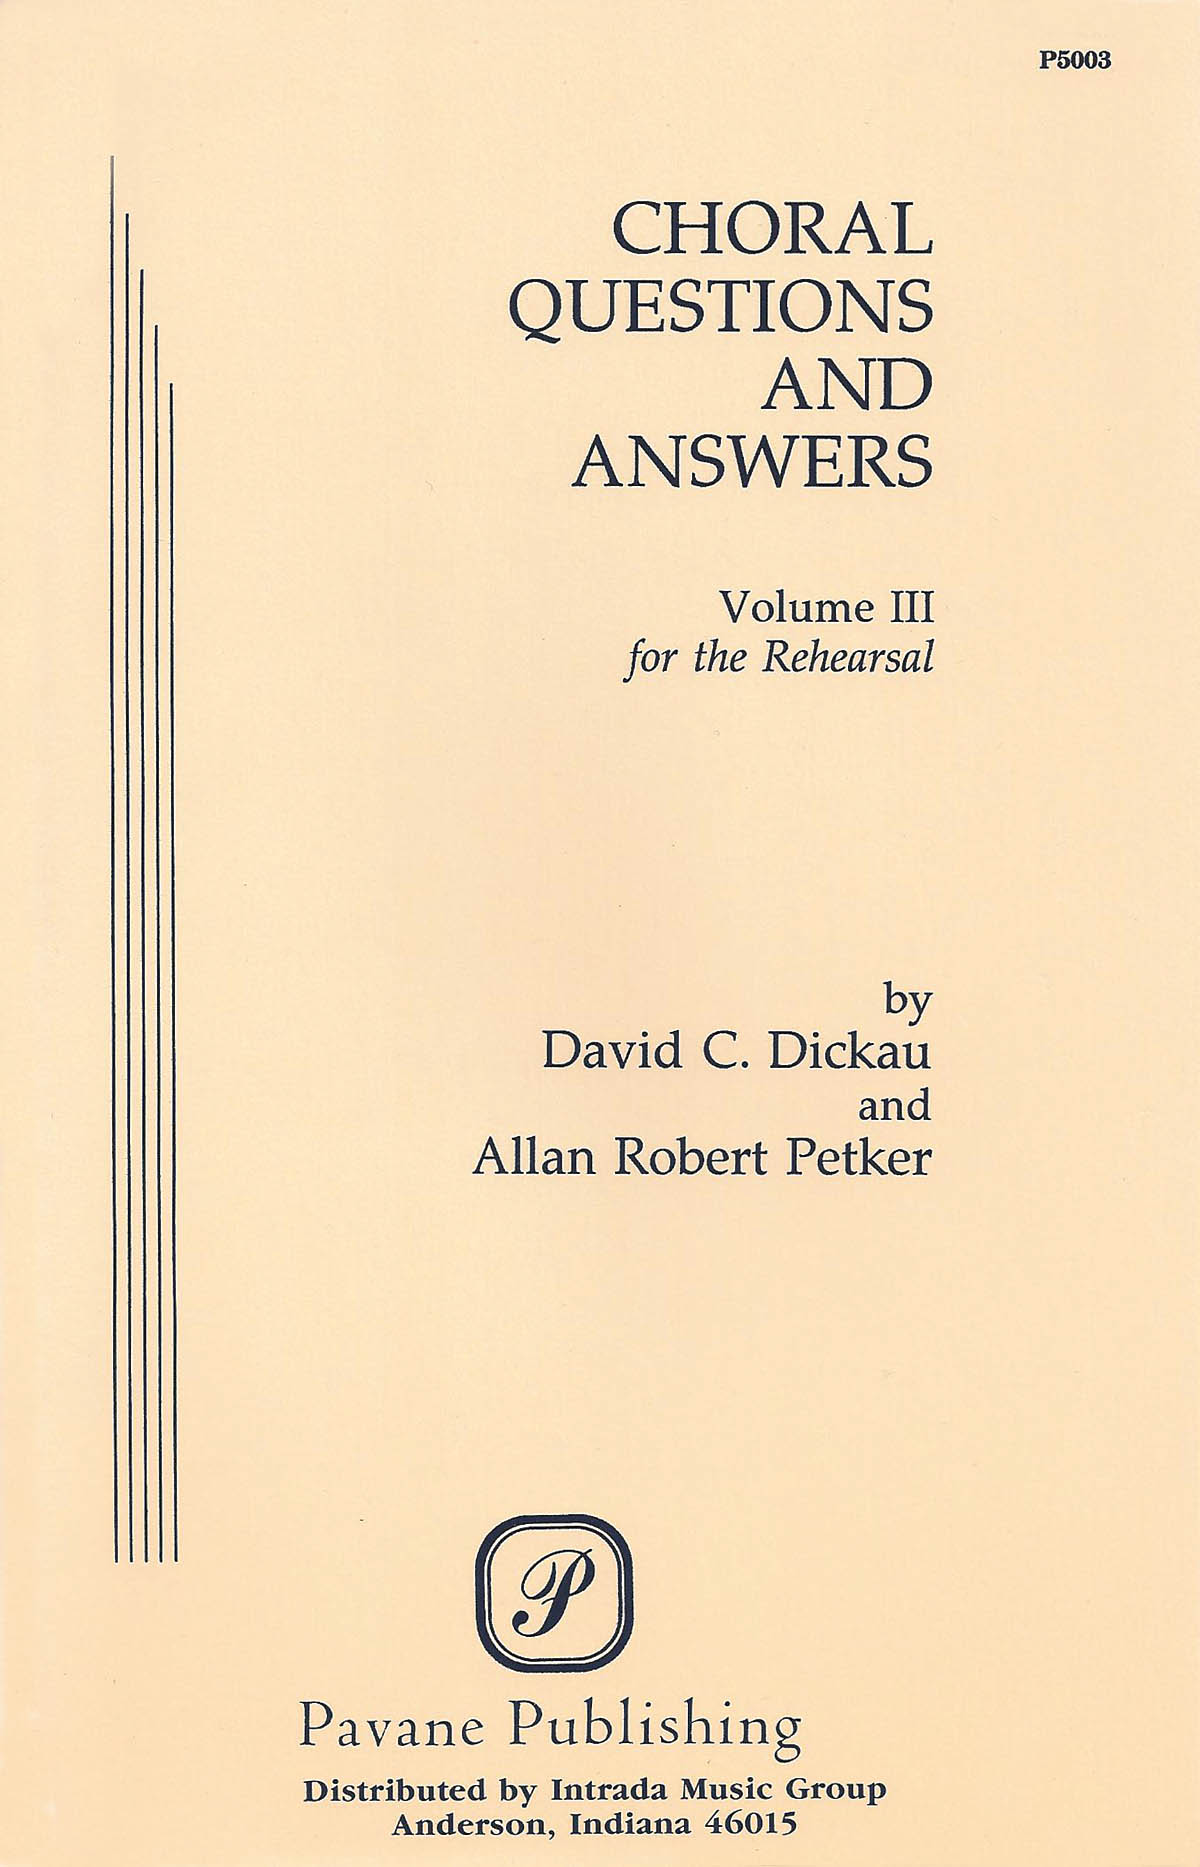 Choral Questions & Answers III: The Rehearsal: Mixed Choir and Accomp.: Vocal